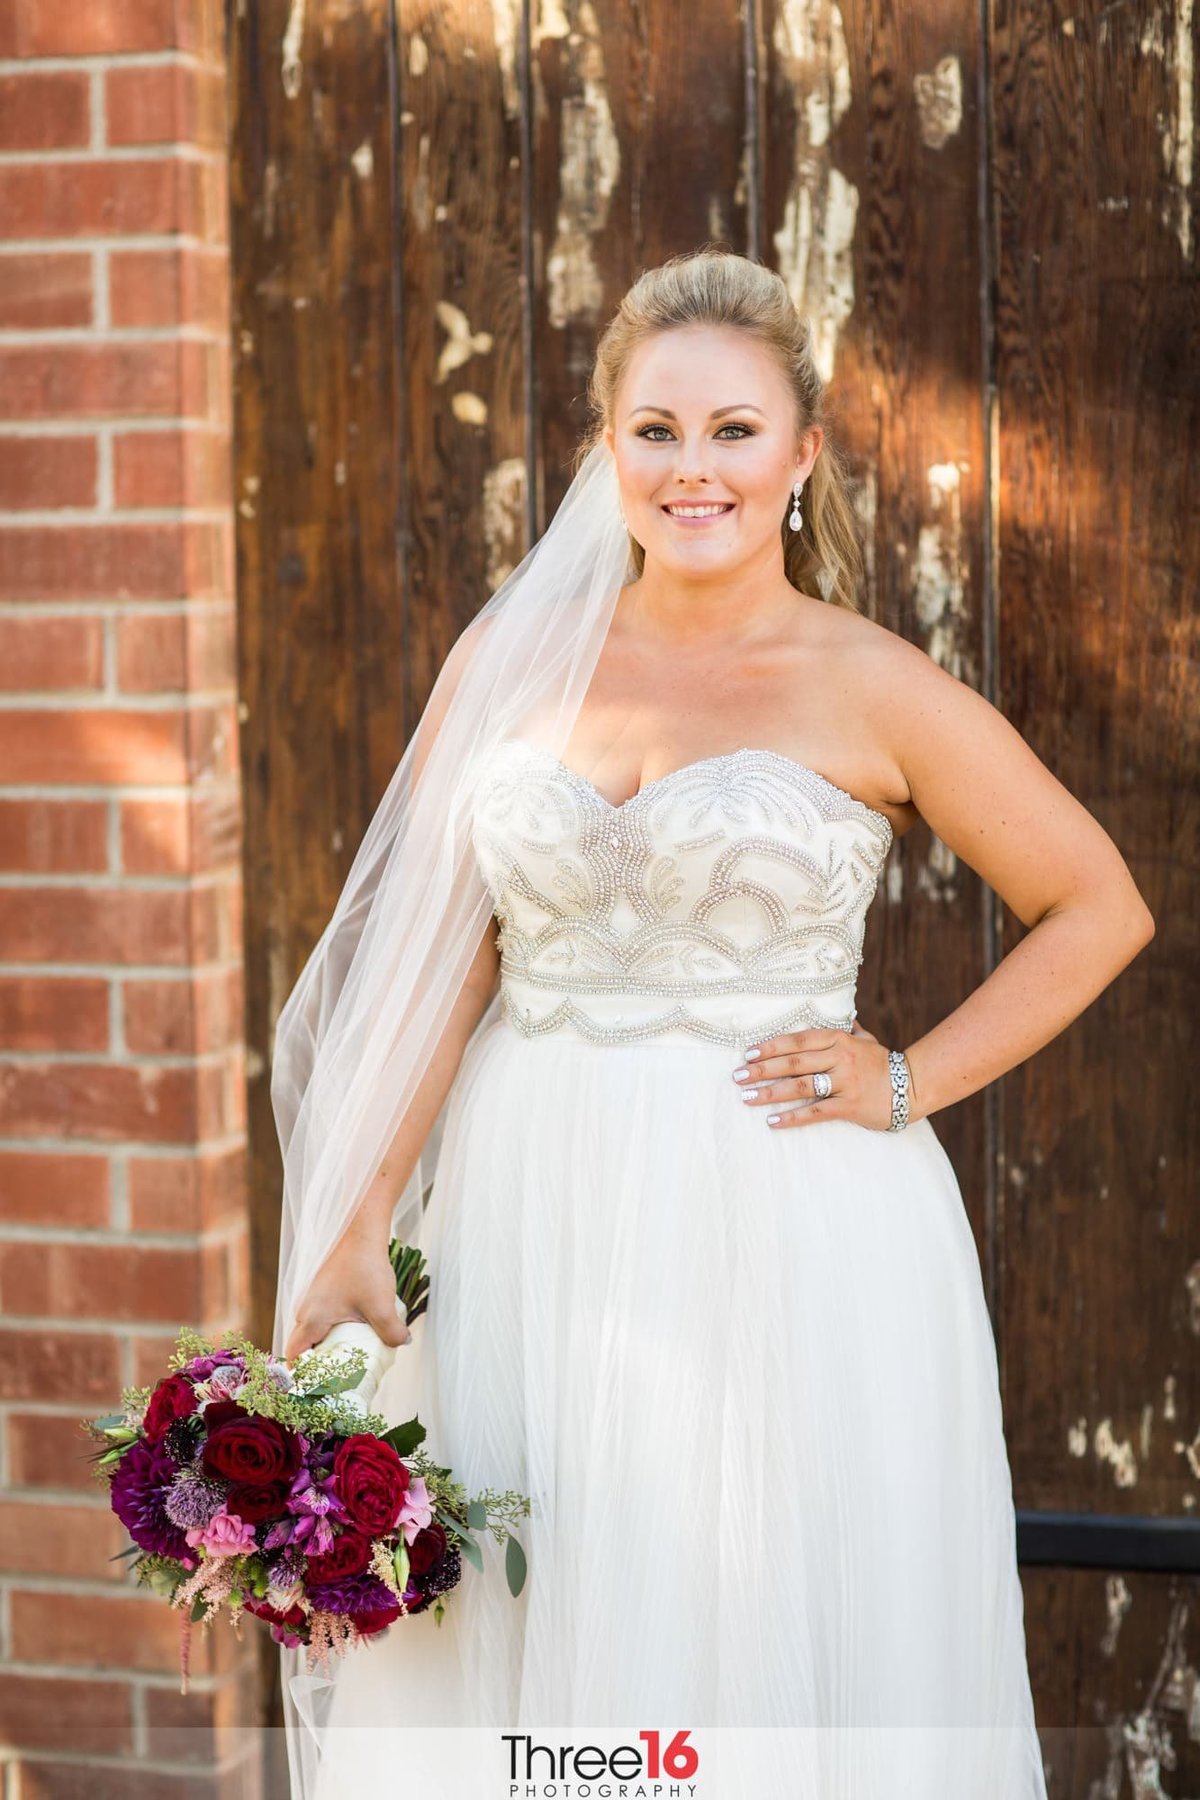 Bride smiles for the camera prior to her wedding ceremony